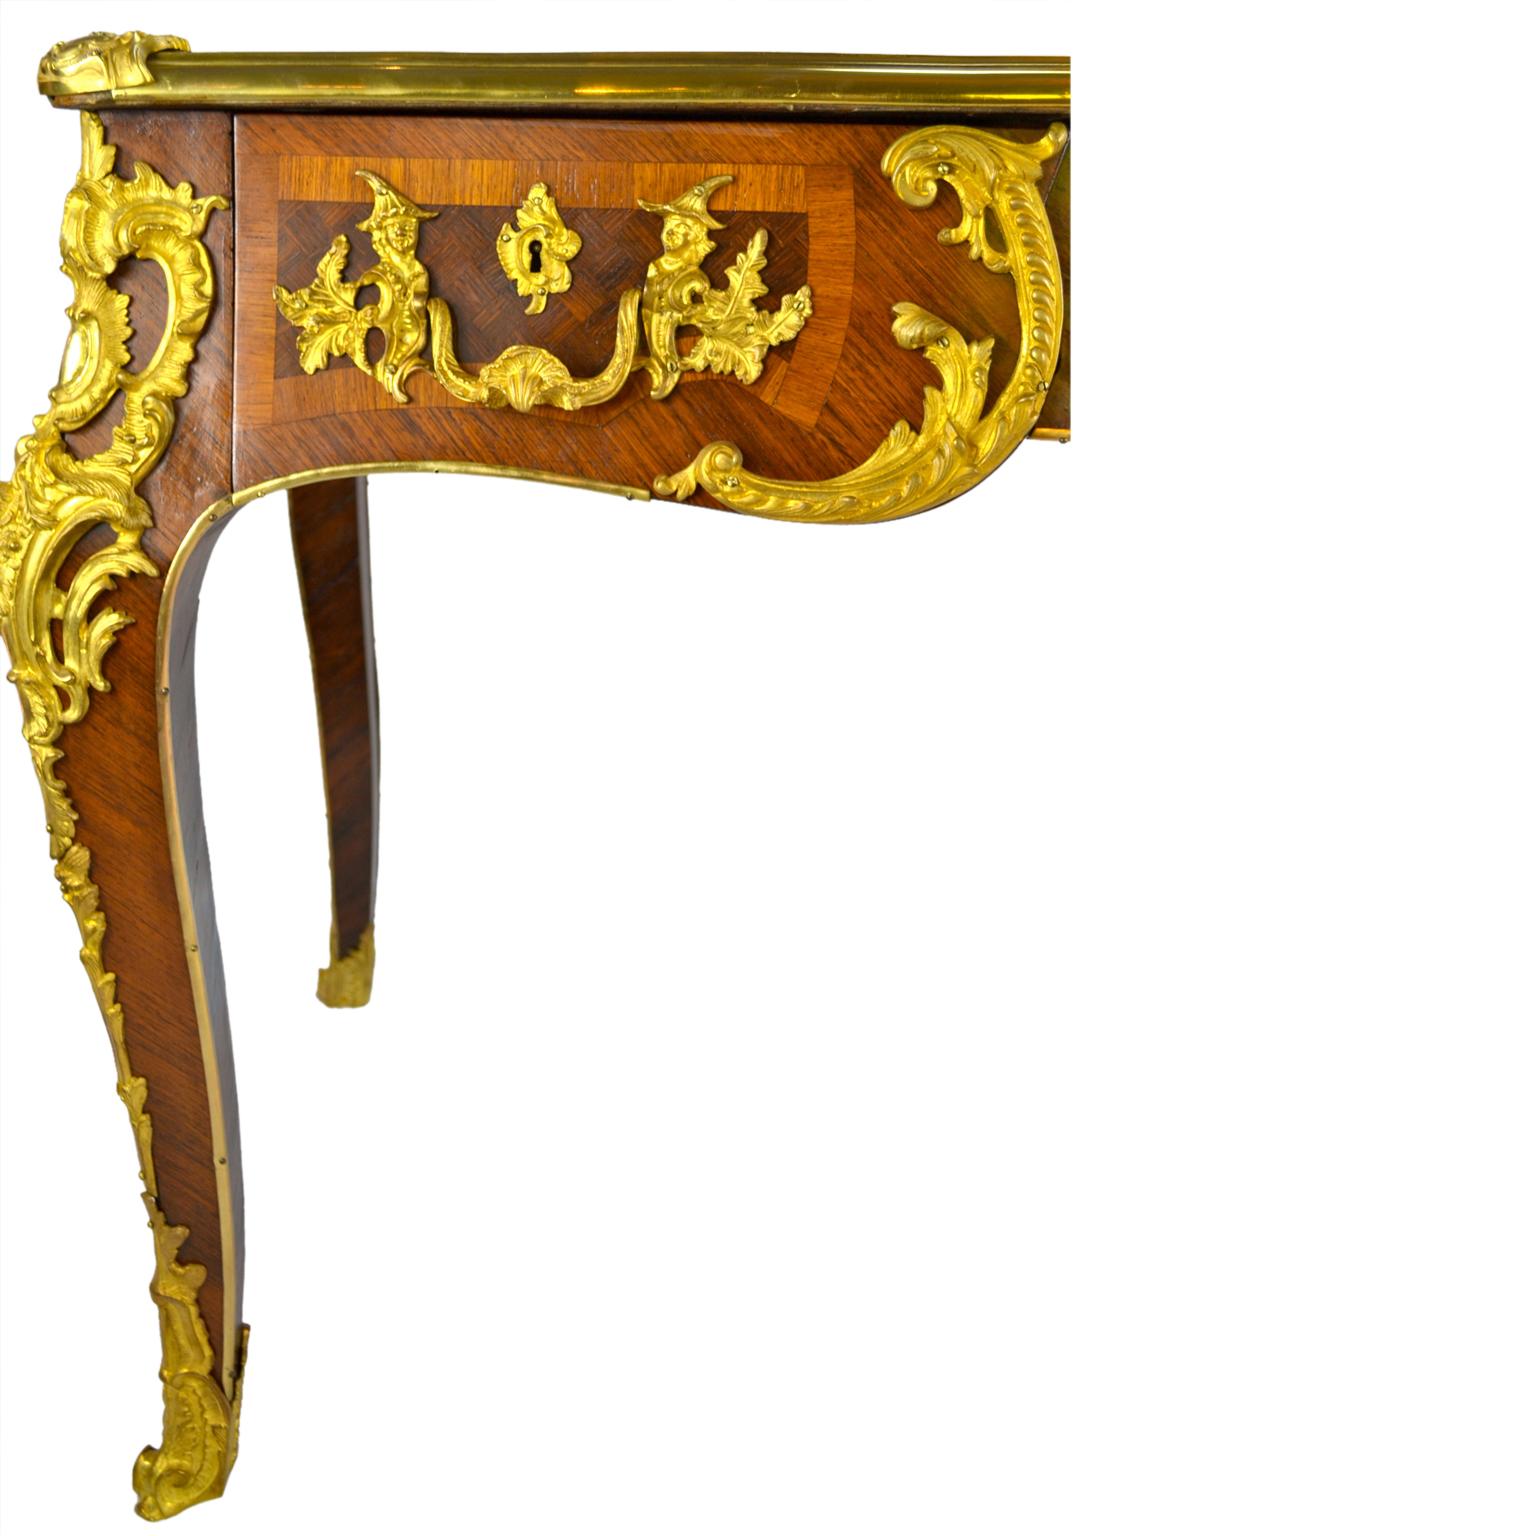 Louis XV Style French Kingwood Parquetry and Gilt Bronze Bureau Plat 'Desk' For Sale 1